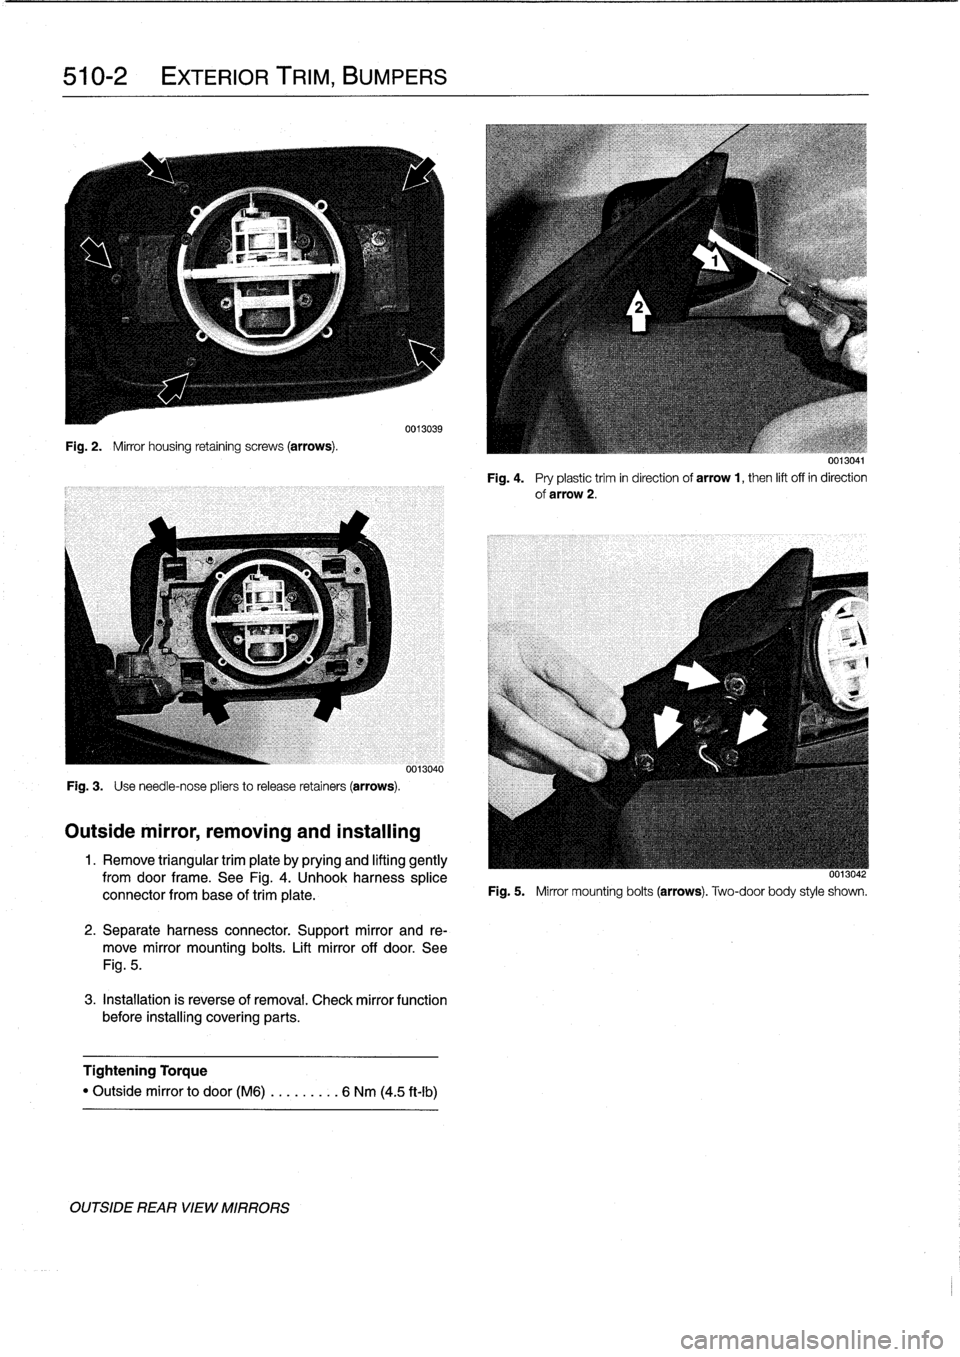 BMW 328i 1997 E36 Workshop Manual 
510-2

	

EXTERIOR
TRIIVI,
BUMPERS

Fig
.
2
.

	

Mirror
housing
retaining
screws
(arrows)
.

Fig
.
3
.

	

Use
need1e-nose
pliers
to
release
retainers
(arrows)
.

Outside
mirror,
removing
and
instal